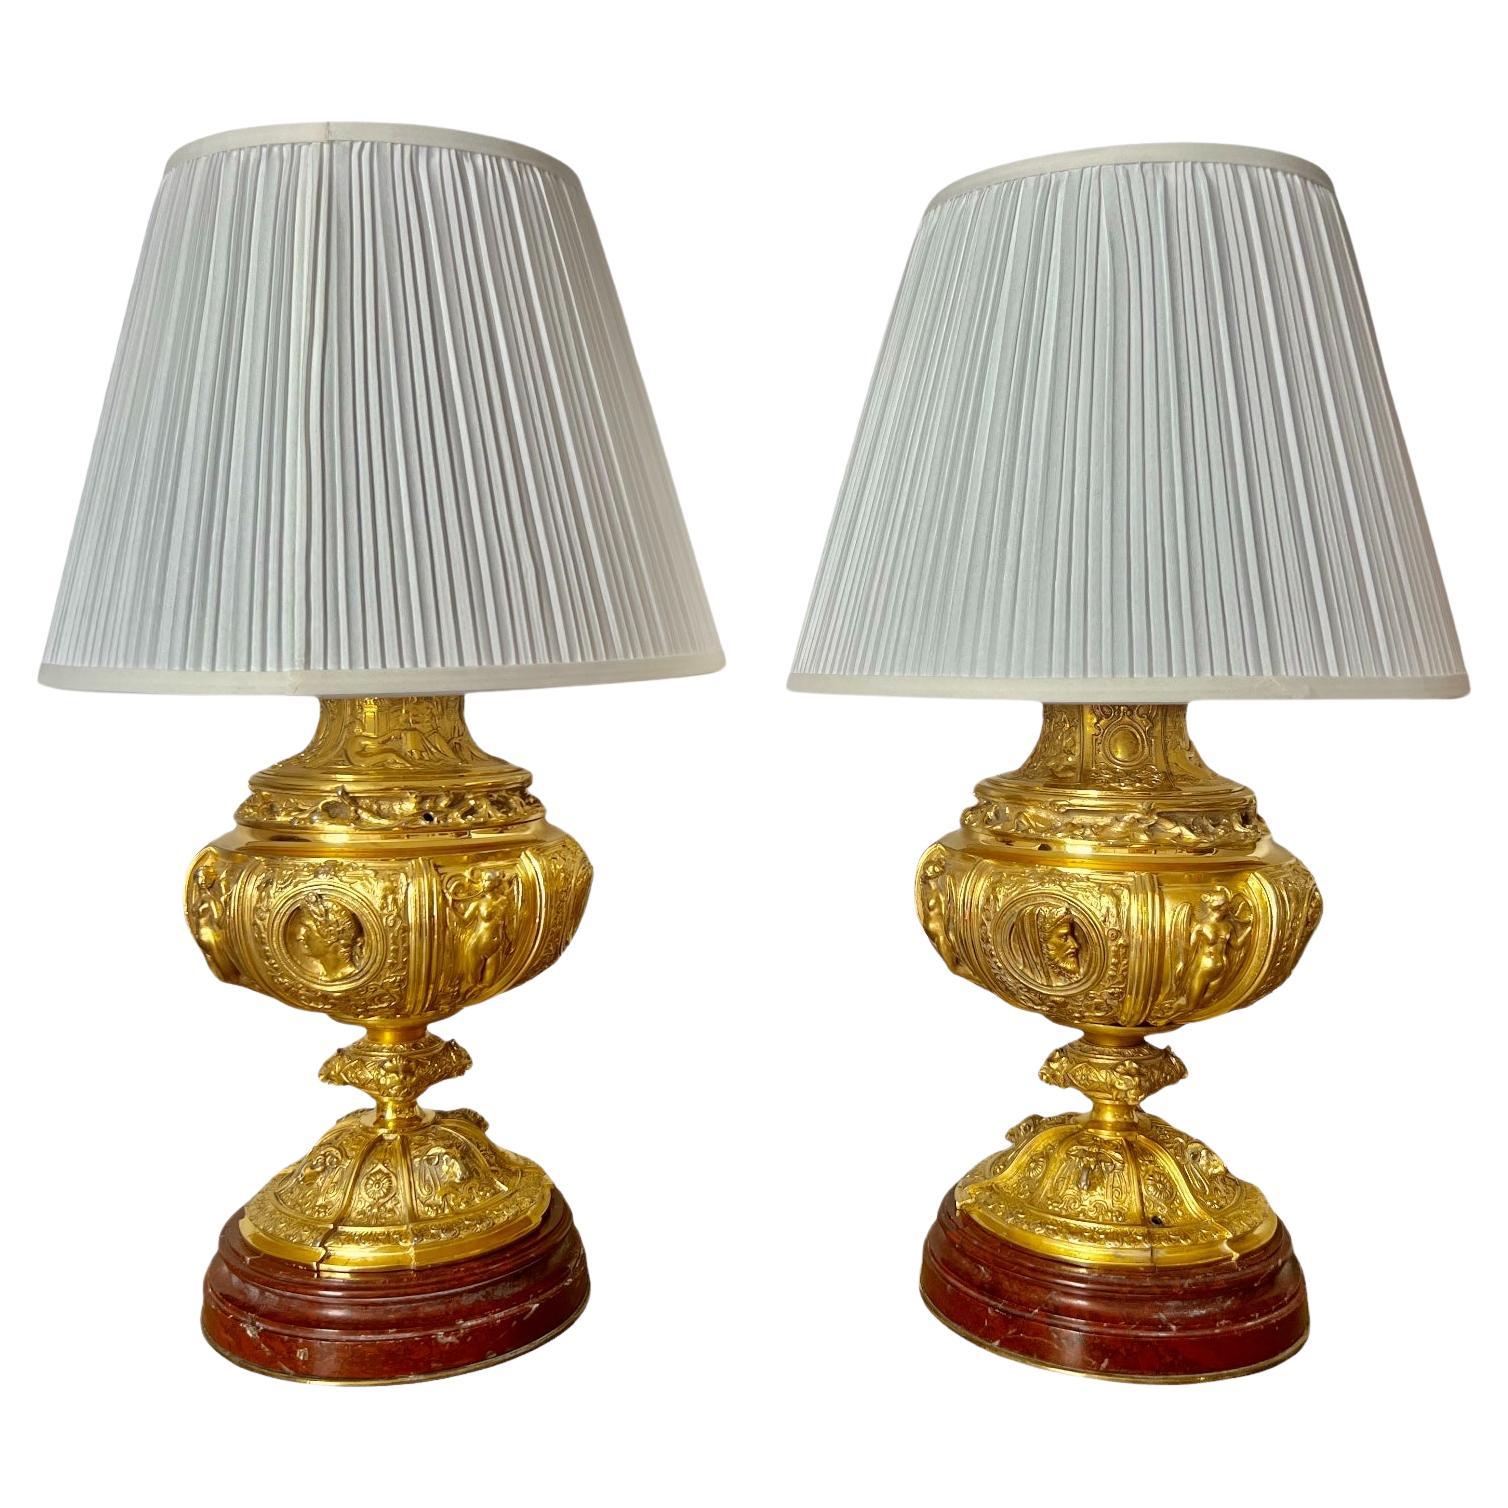 19th Century Pair of Gilt Bronze Lamps with Red Griotte Marble Bases For Sale